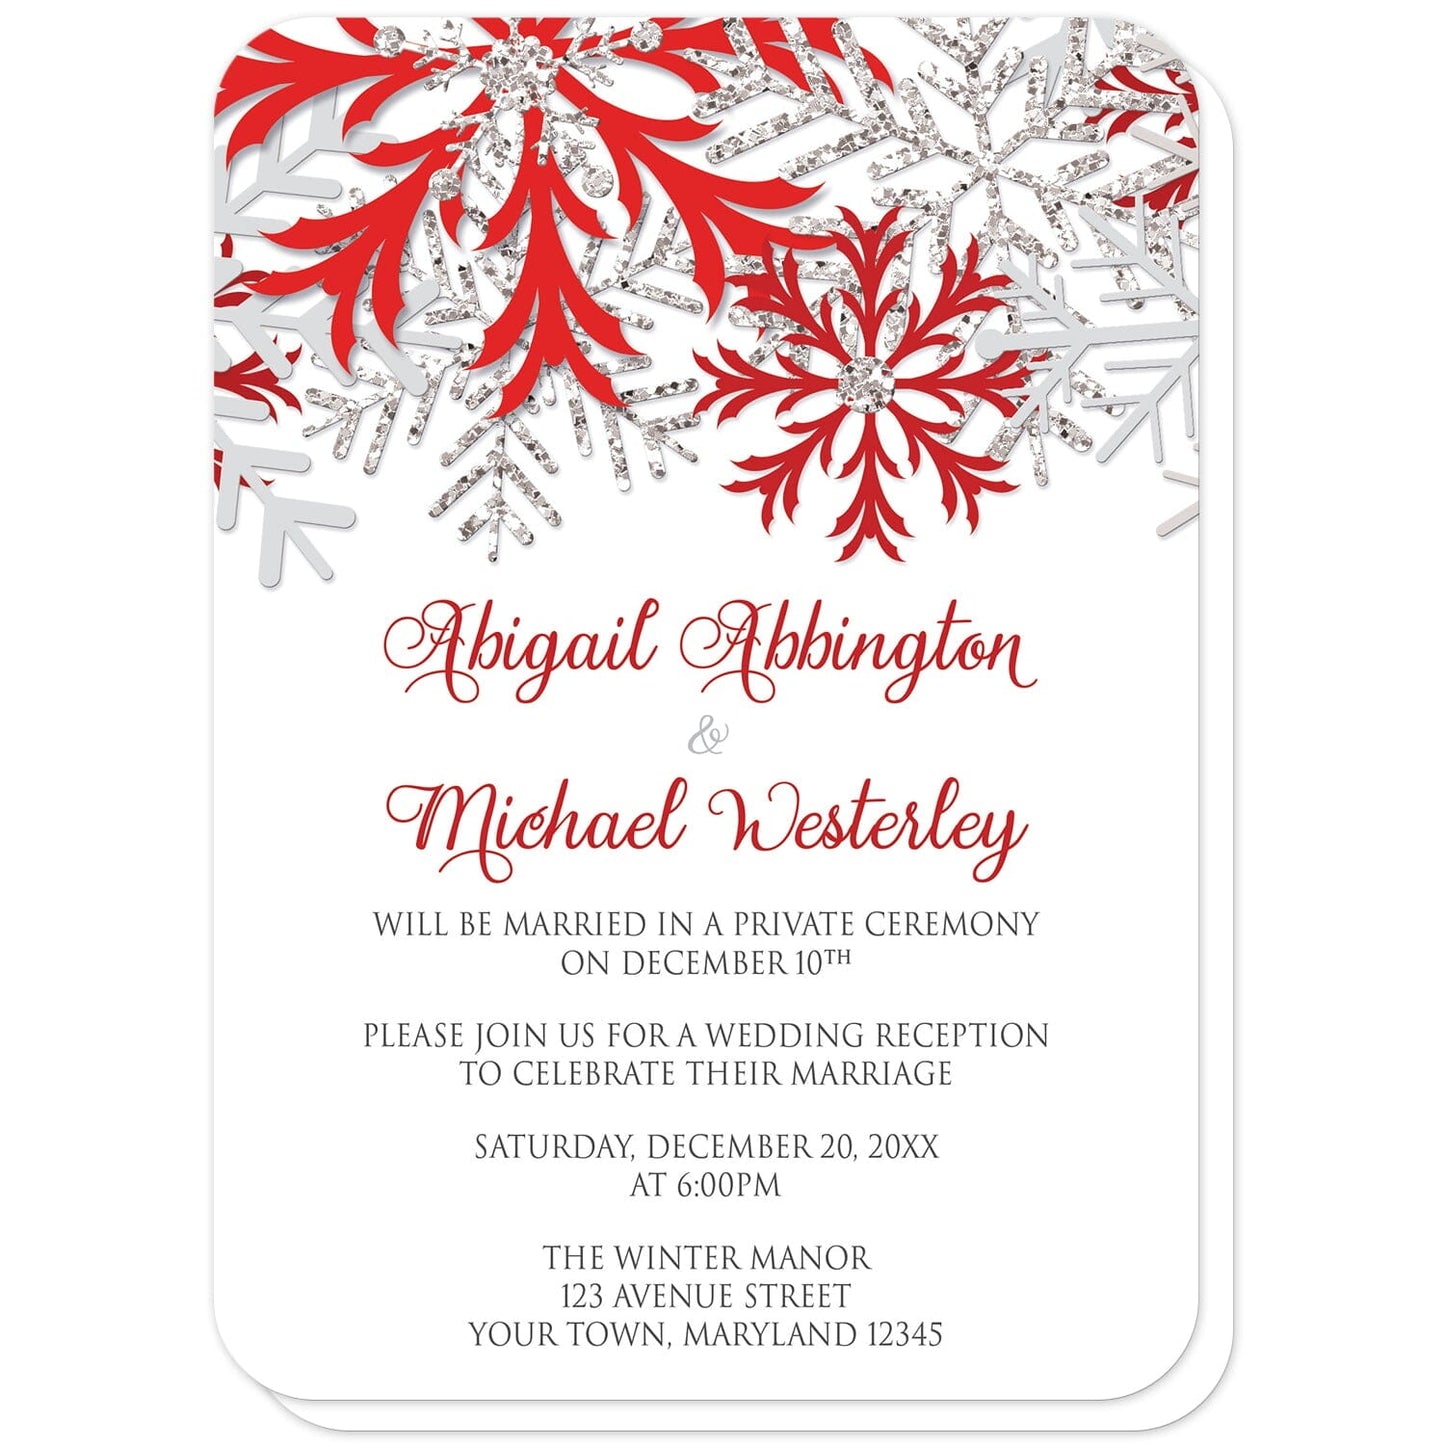 Winter Red Silver Snowflake Reception Only Invitations (with rounded corners) at Artistically Invited. Beautiful winter red silver snowflake reception only invitations designed with red, darker red, silver-colored glitter-illustrated, and light gray snowflakes along the top over a white background. Your personalized post-wedding reception details are custom printed in red and gray below the pretty snowflakes.